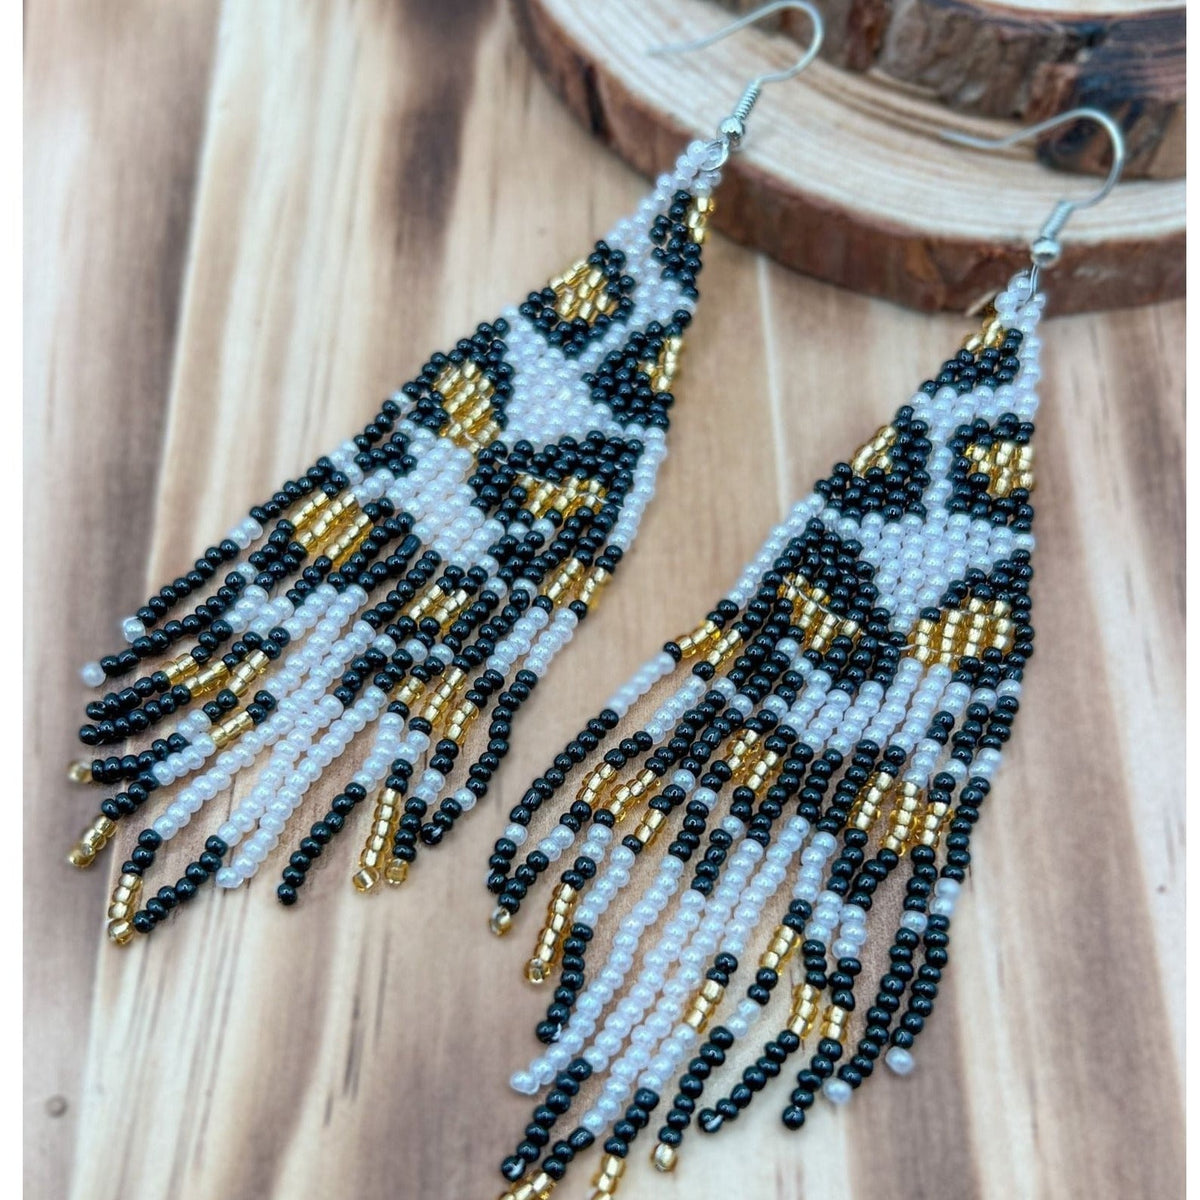 Baskin | Leopard Beaded Earrings | Black, Gold, White | Seed Beads Earrings TheFringeCultureCollective